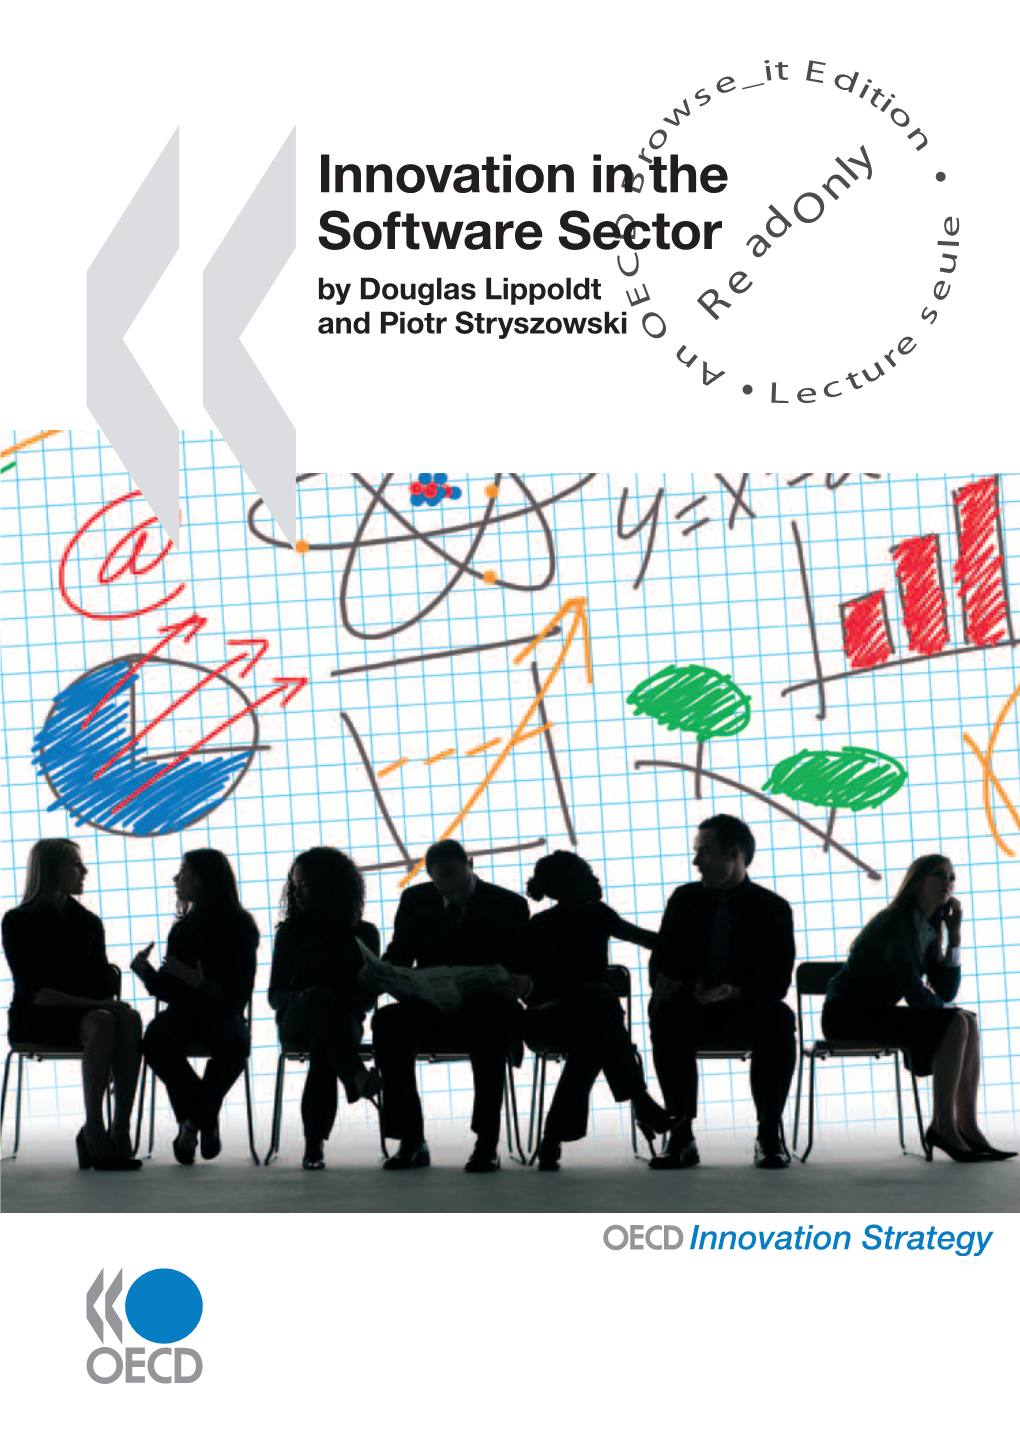 Innovation in the Software Sector